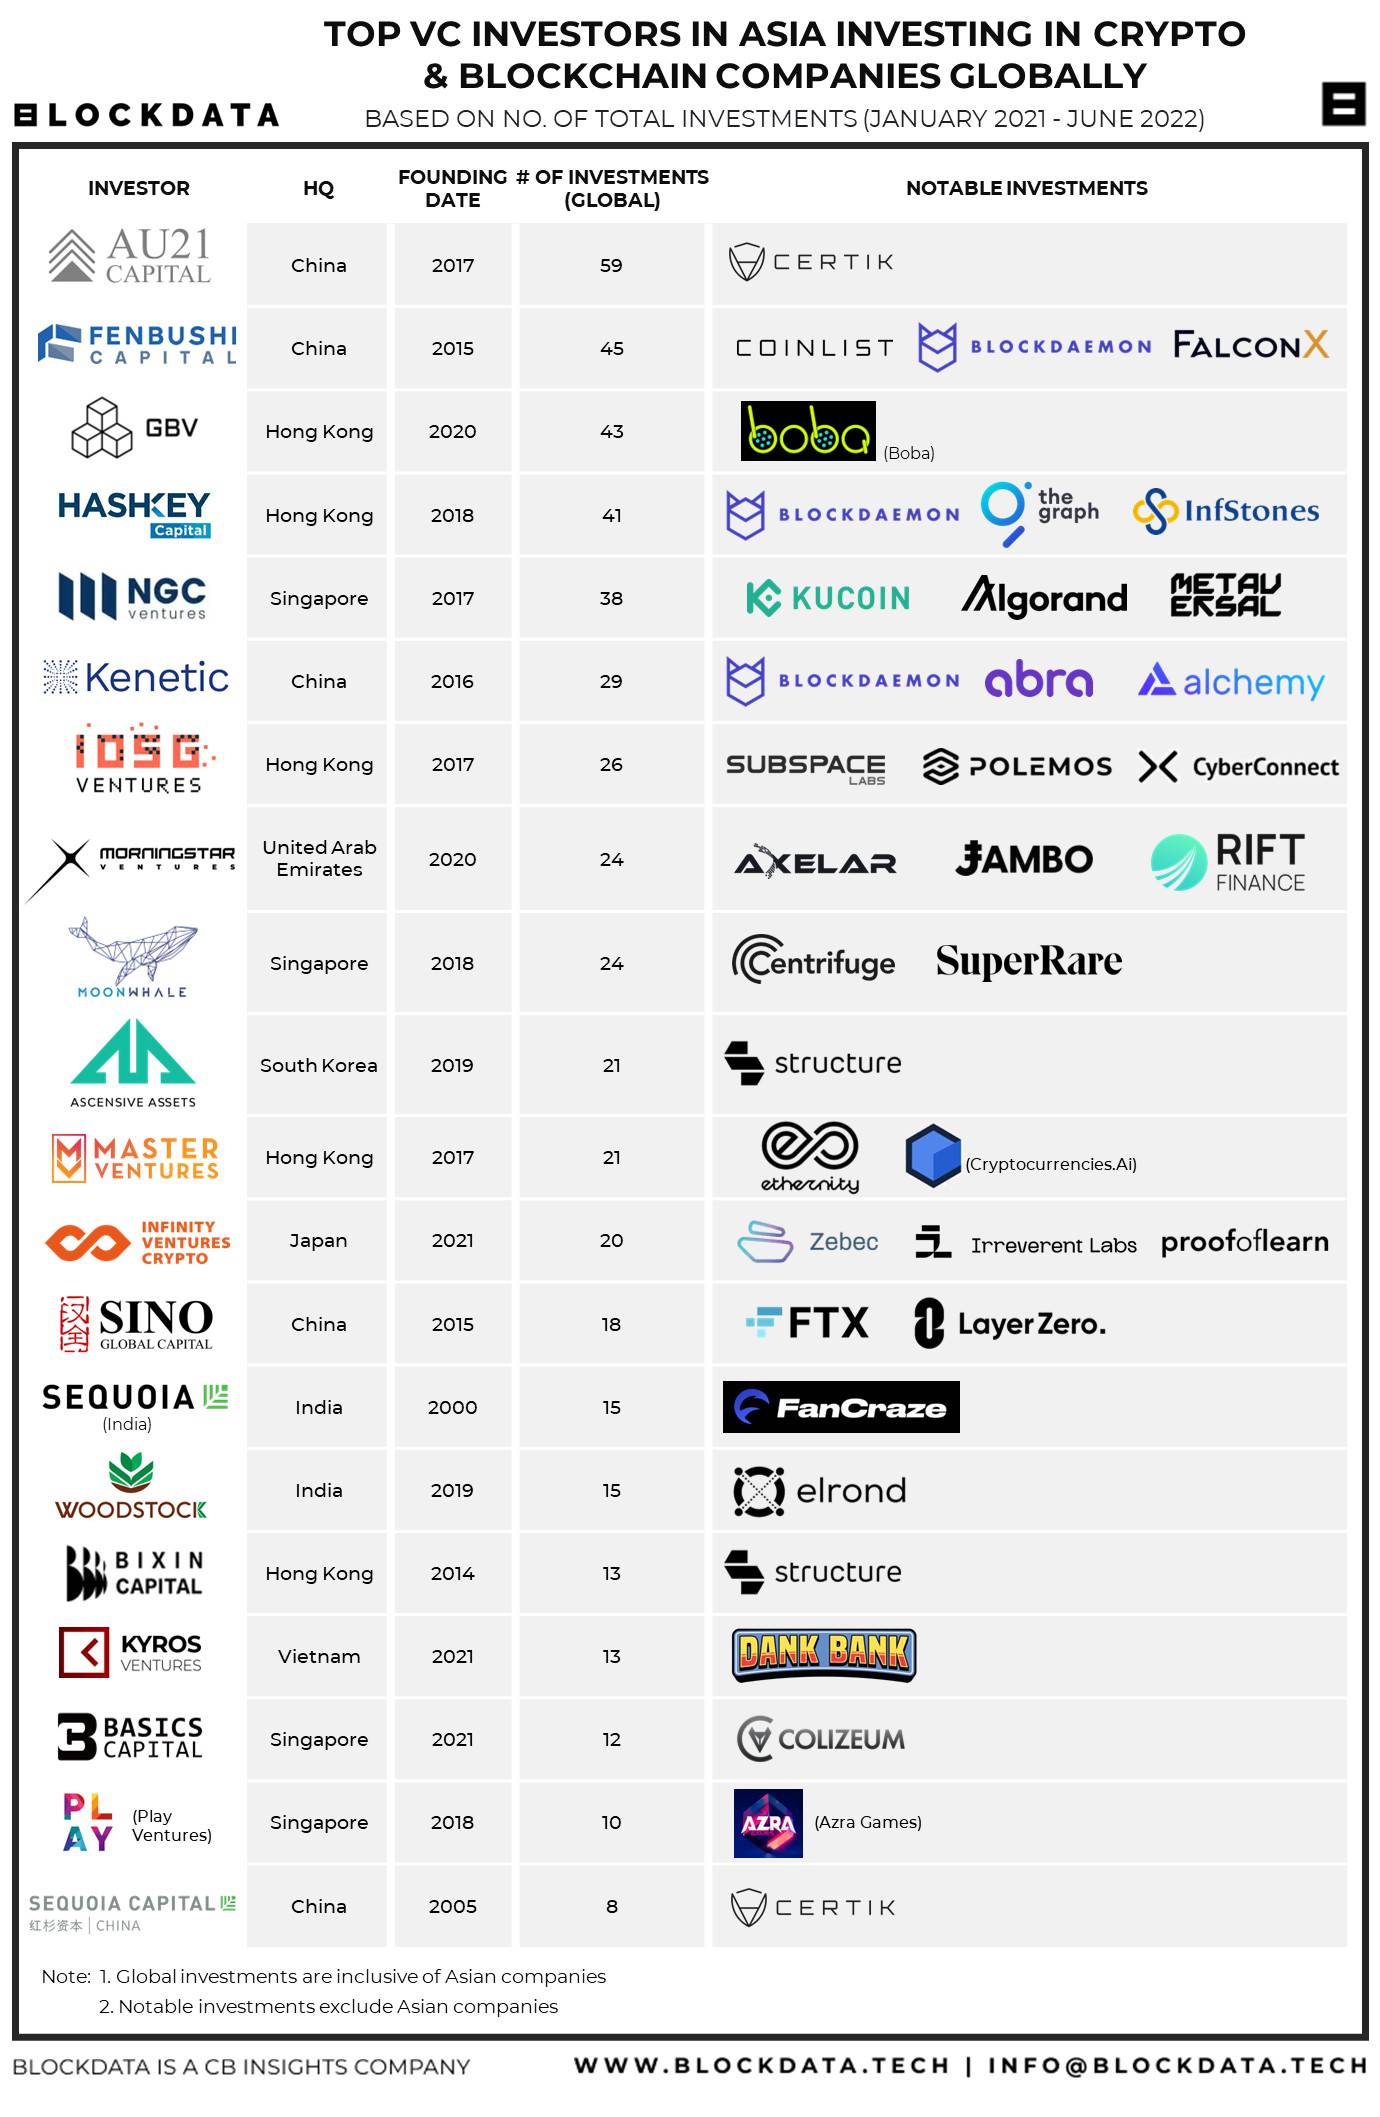 The most active VCs in Asia's blockchain and crypto ecosystem CB